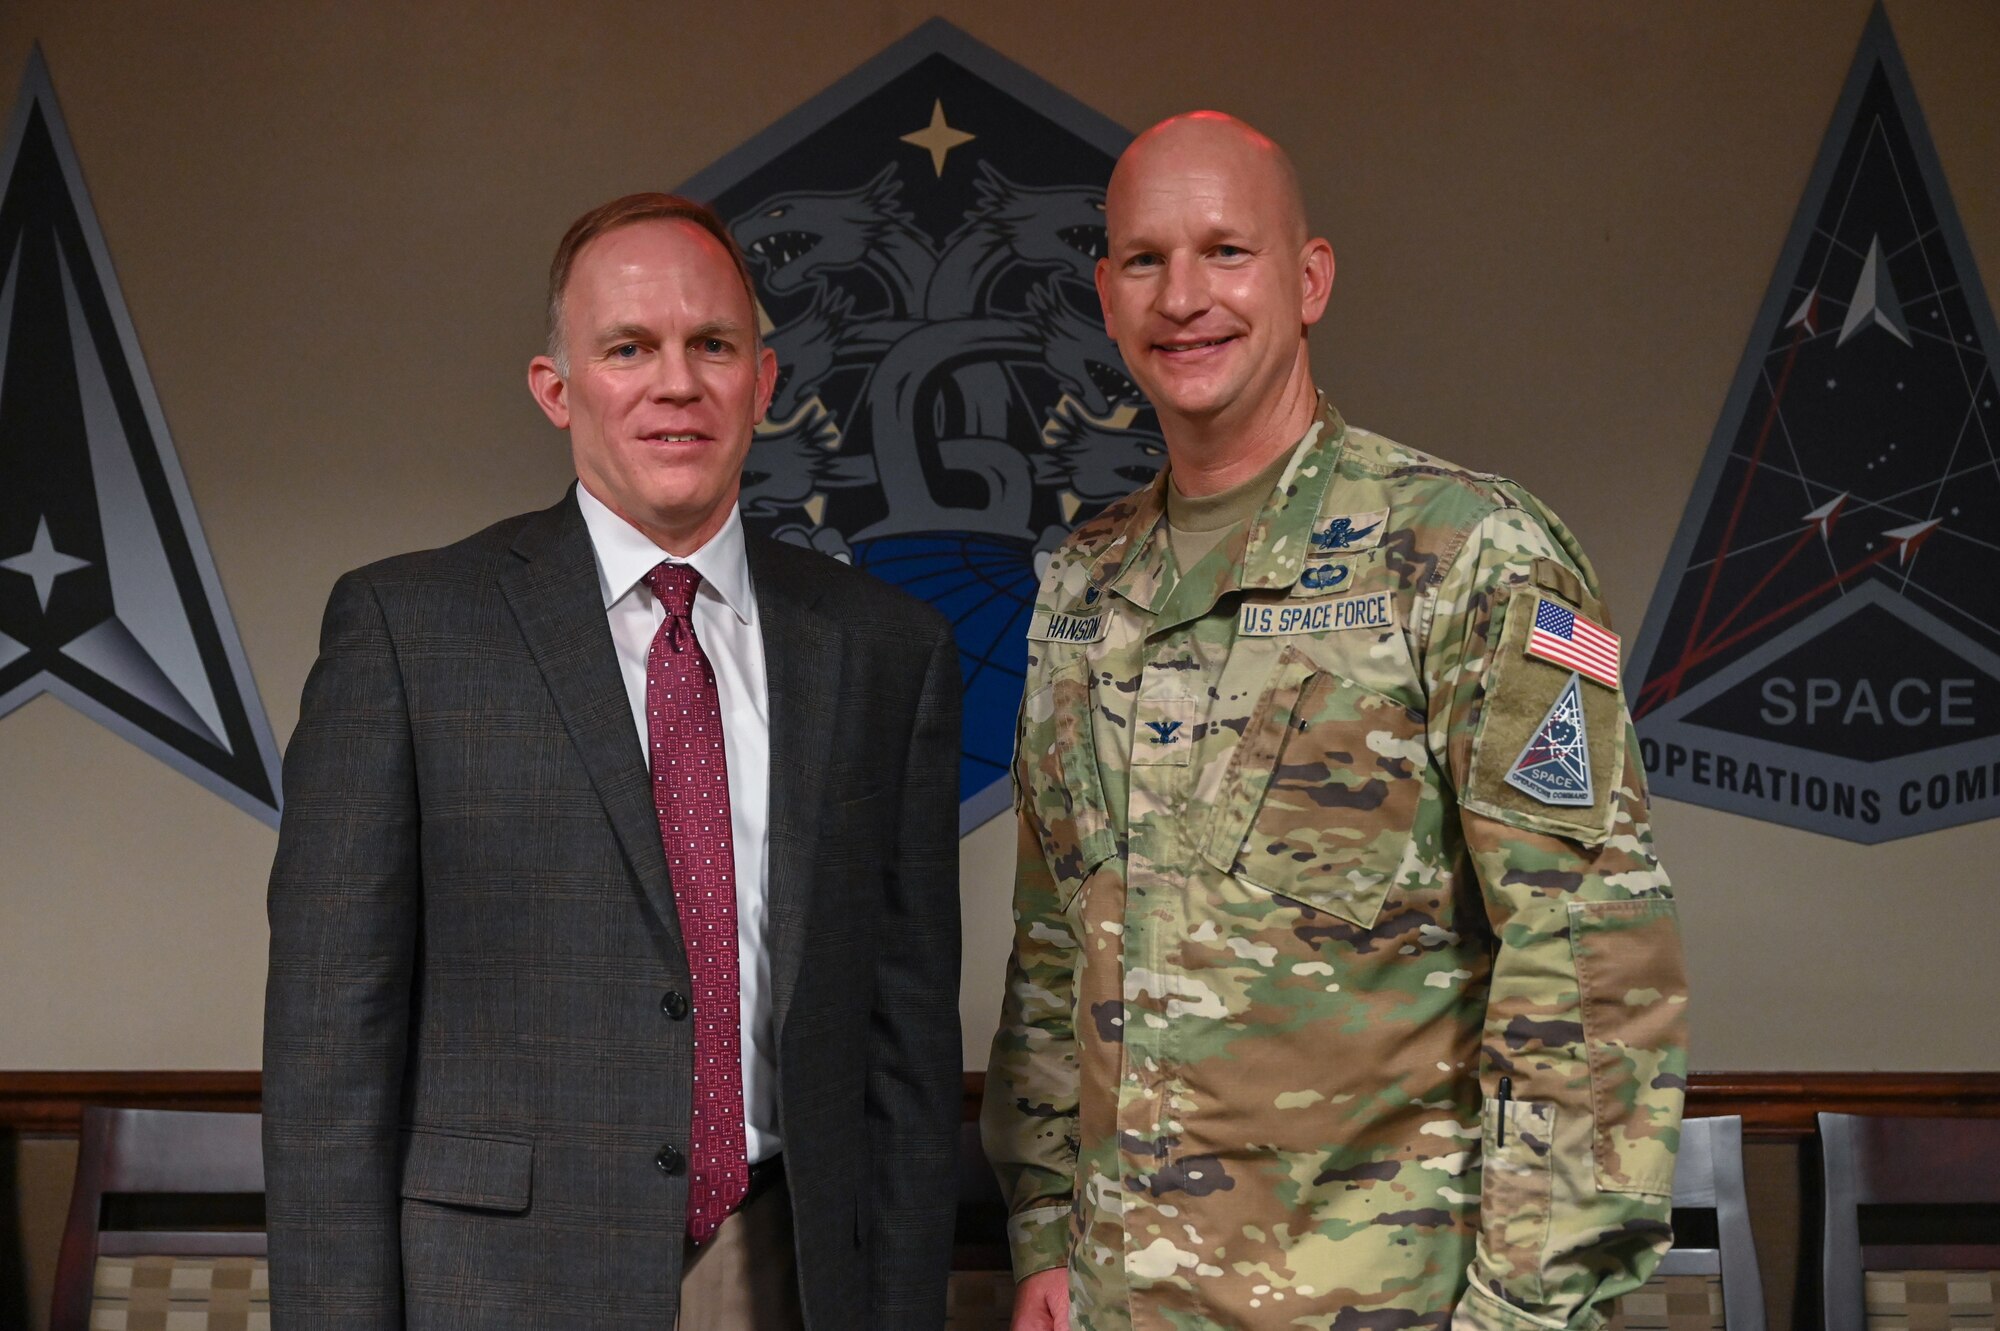 From the left, Dr. Brian Kehl, Space Operations Command Deputy to the Commanding General – Support, congratulates U.S. Space Force Col. David Hanson, commander of Space Base Delta 1, for winning the 2023 Commander in Chief’s Annual Award for Installation Excellence at Peterson Space Force Base, Colorado on June 28, 2023.  Peterson SFB was one of the six recipients of a highly competitive presidential award, selected for their exemplary support of Department of Defense missions. (U.S. Space Force Photo by Airman 1st Class Cody Friend)